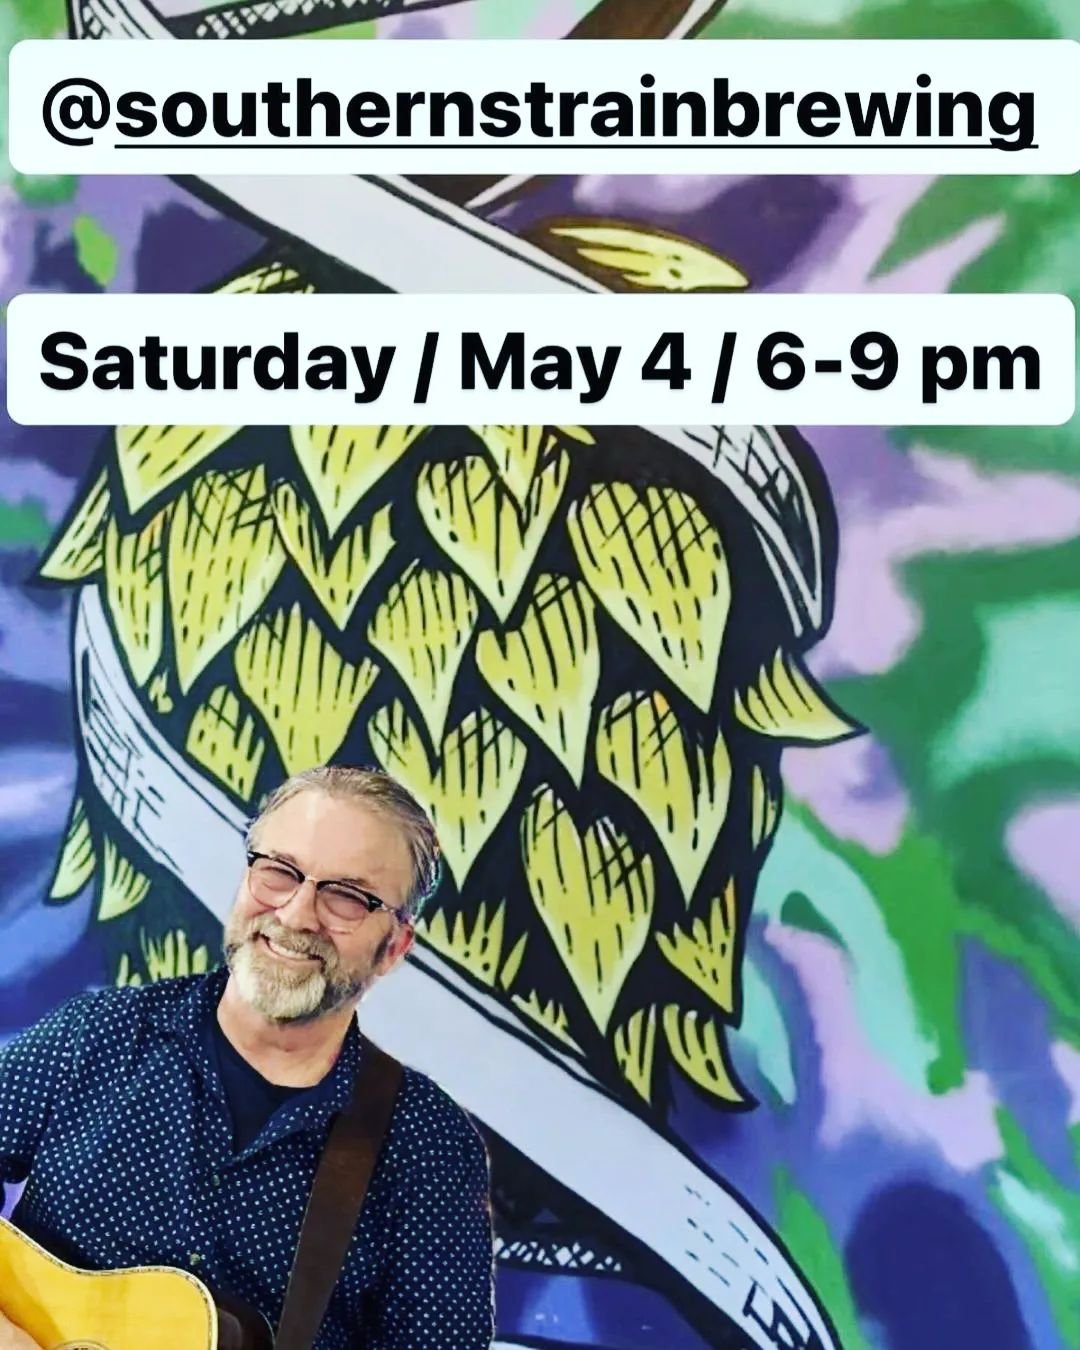 It's been a booming day in Cabarrus County!!!

Don't let the rain stop you from going out. Head on over to @southernstrainbrewing and listen to the wonderful @neal_carter_music64 🎙️

Grab a few brews and food from The Eatery and relax this Saturday 